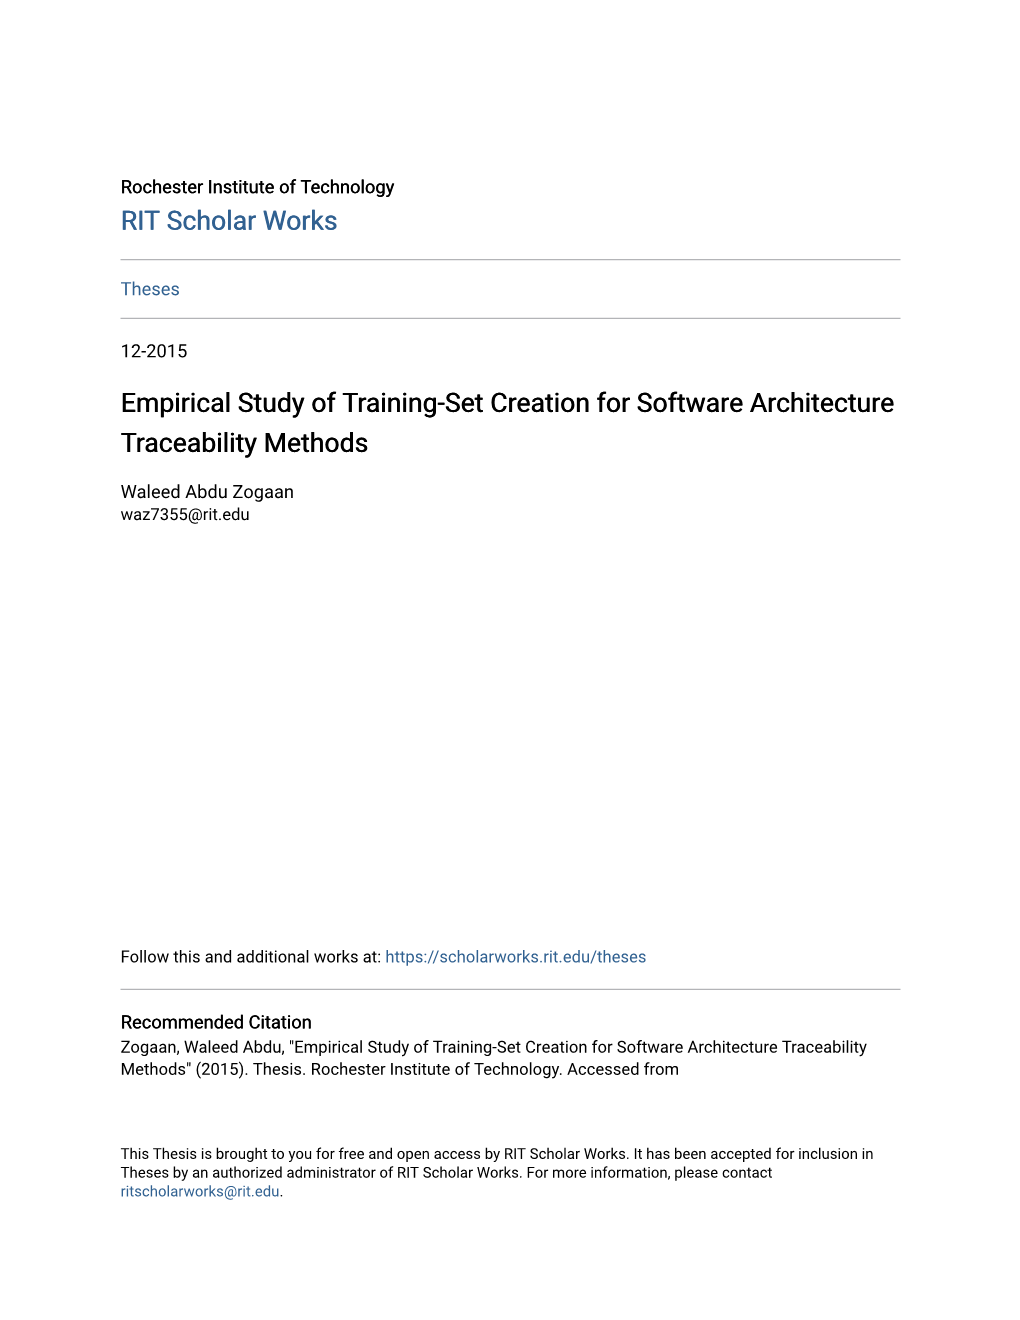 Empirical Study of Training-Set Creation for Software Architecture Traceability Methods